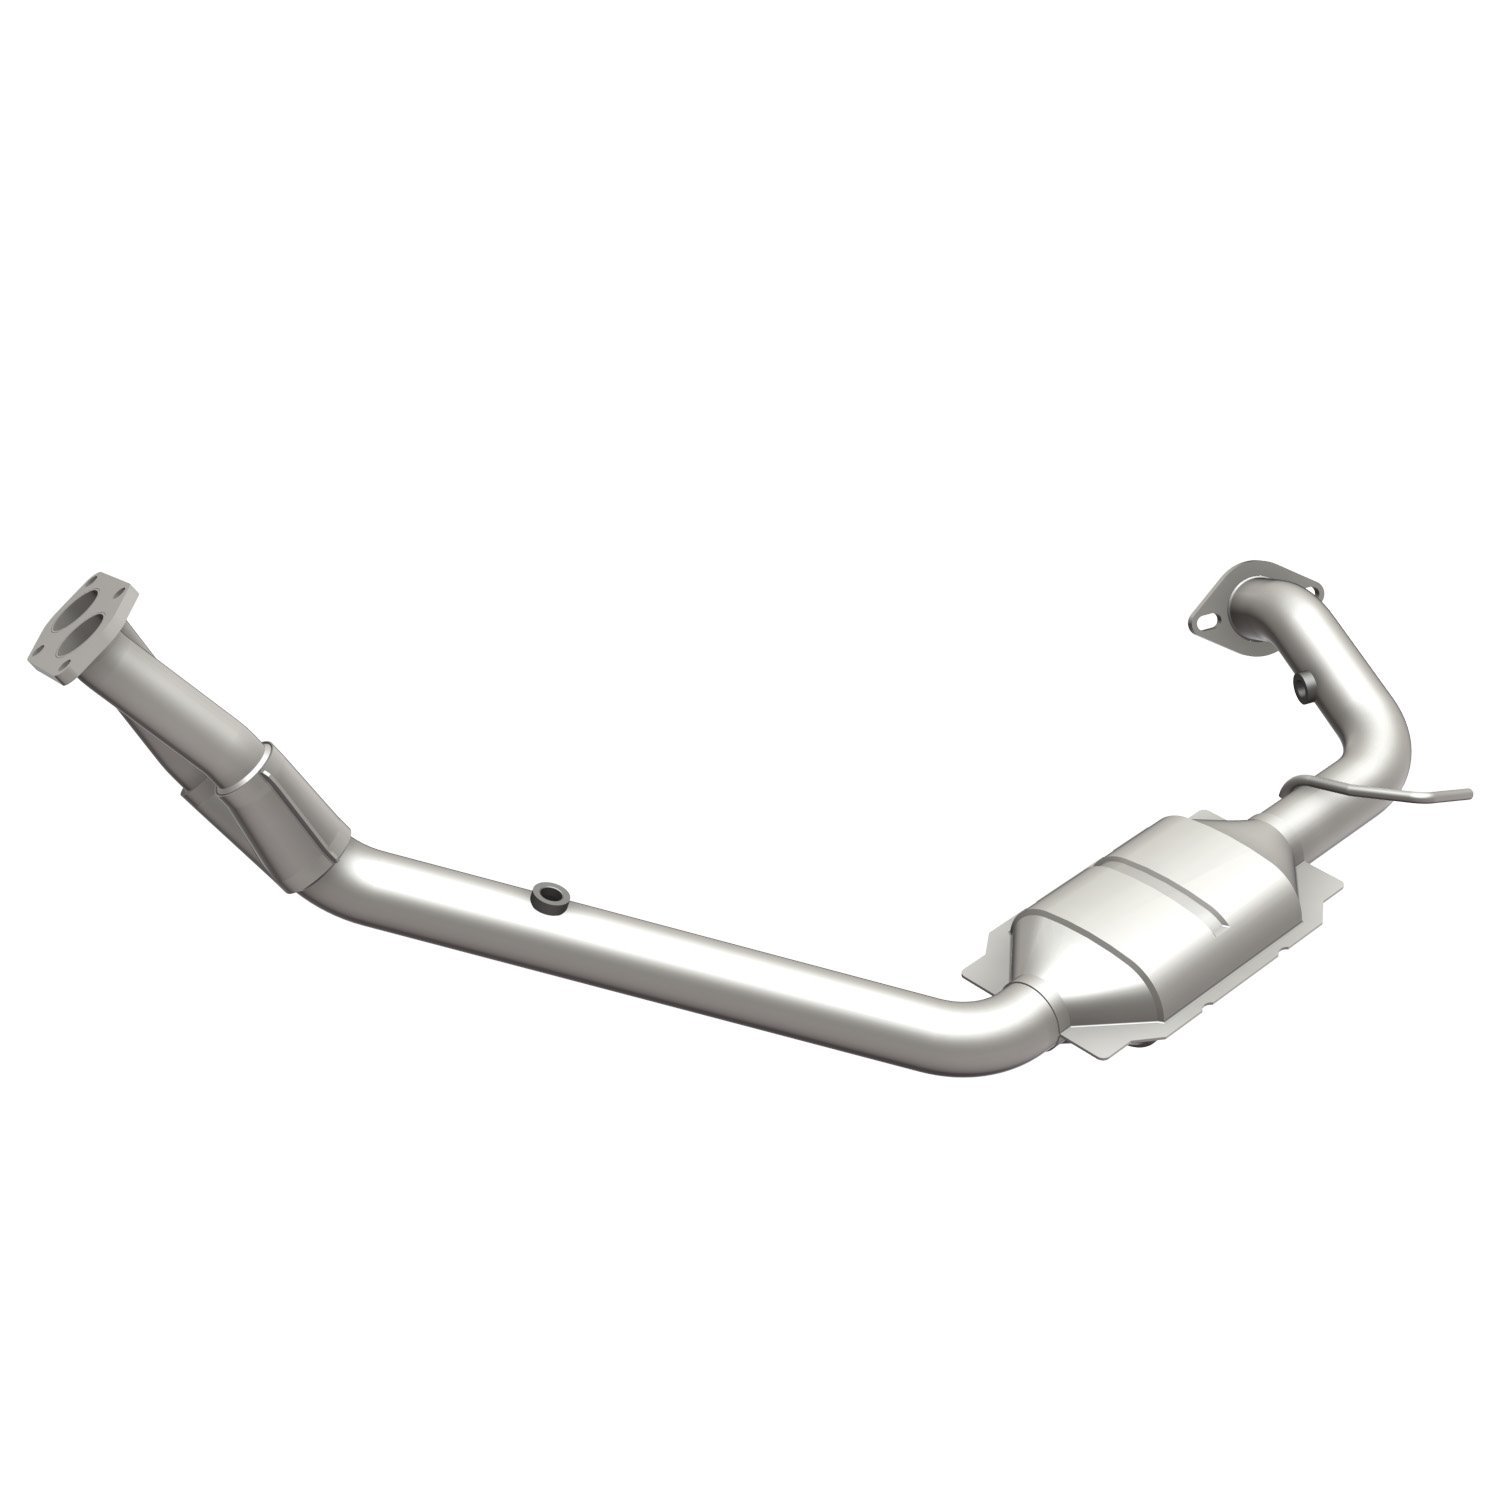 HM Grade Federal / EPA Compliant Direct-Fit Catalytic Converter 23636